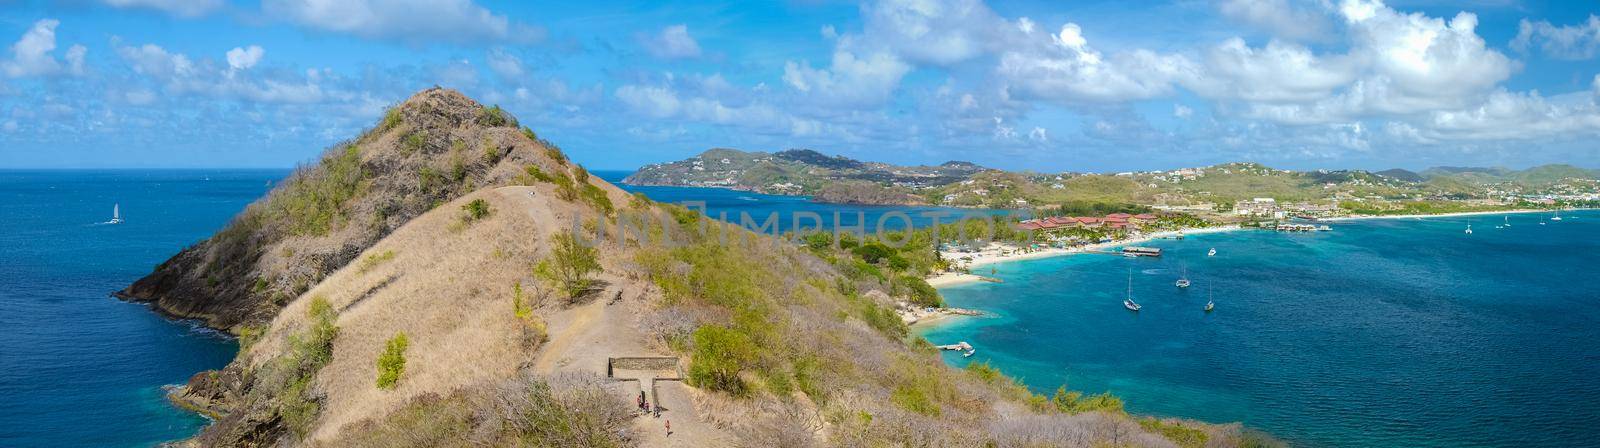 panoramic view from Pingeon Island Saint Lucia or St Lucia Caribbean pigeon island by fokkebok